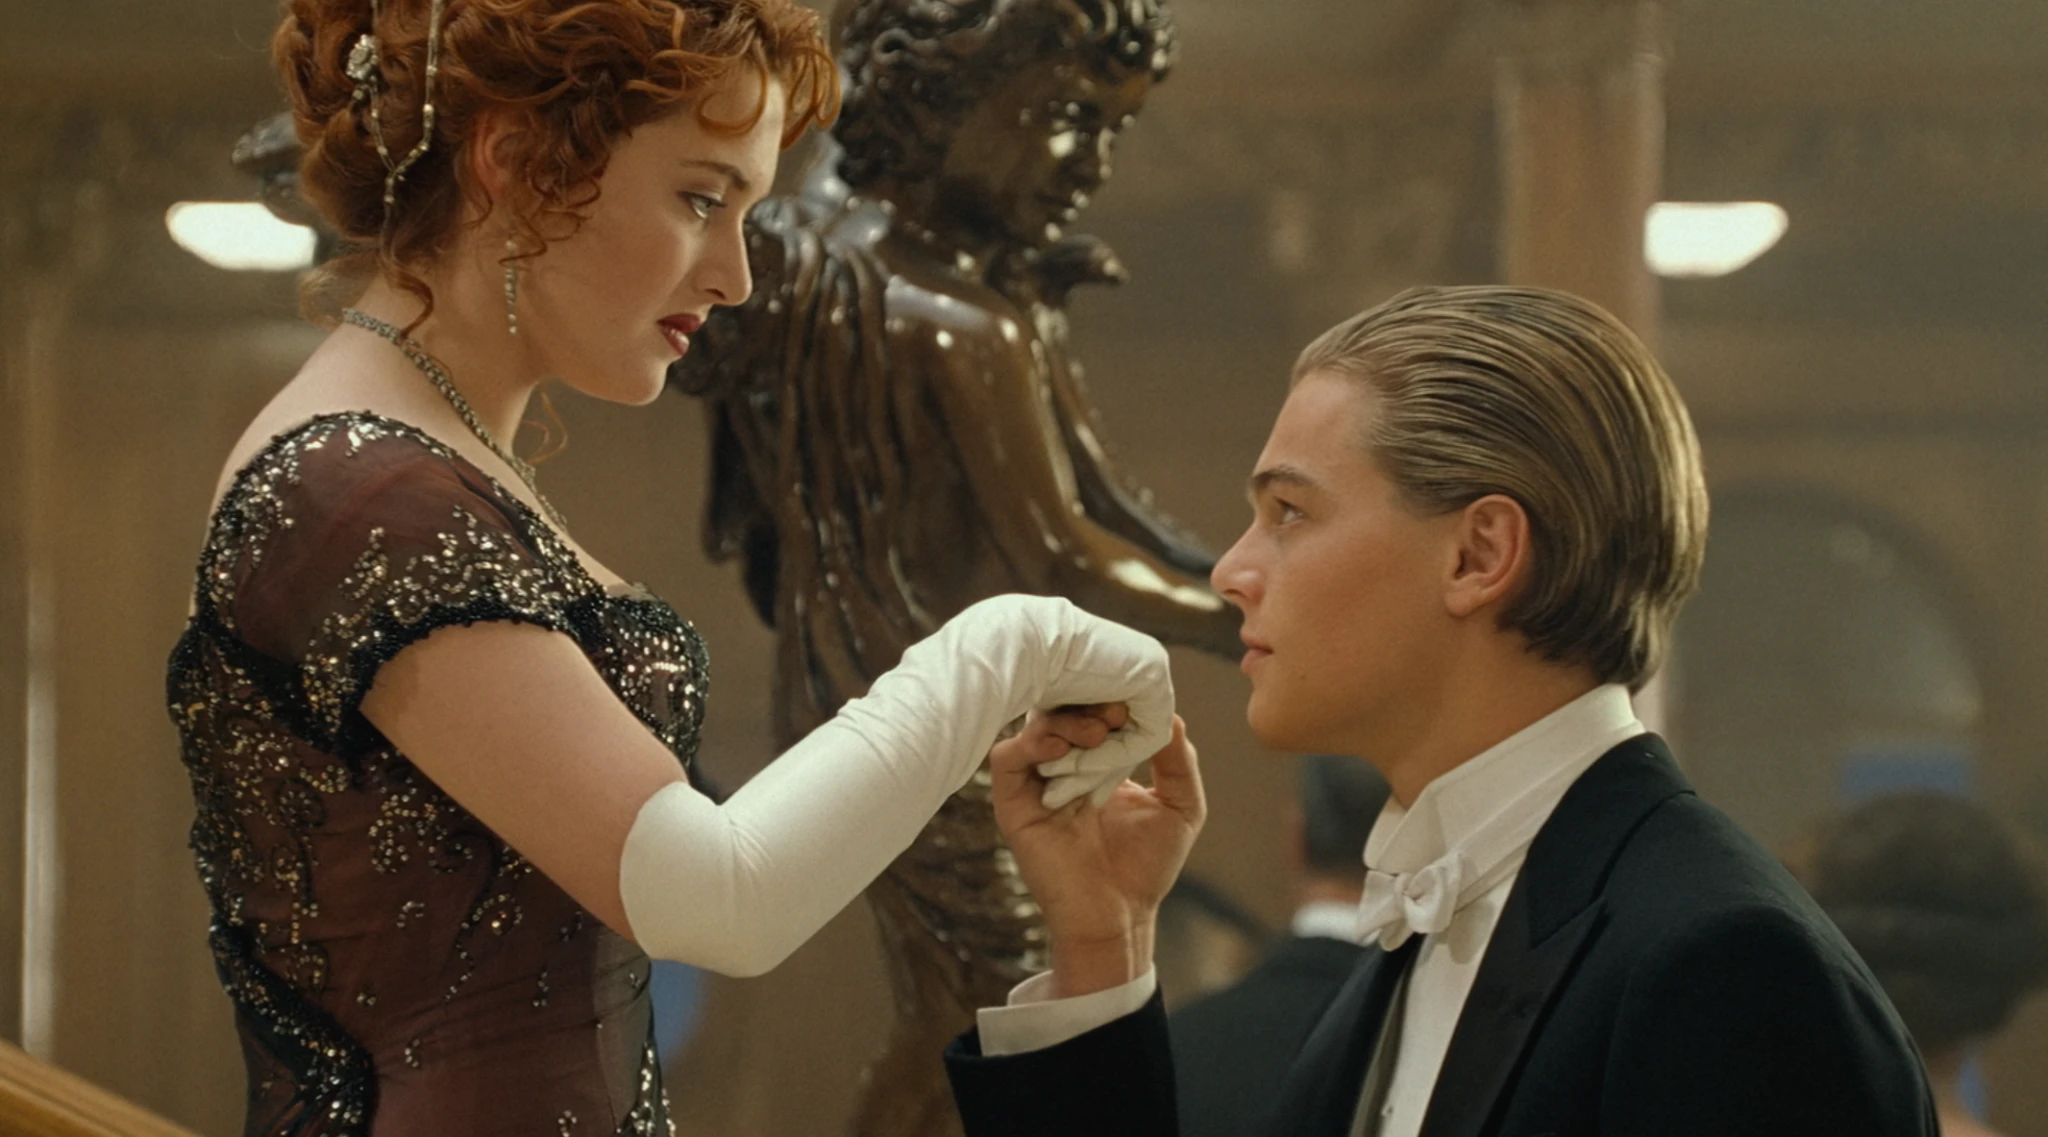 'Titanic' Is Heading Back to Theaters for Its 25th Anniversary